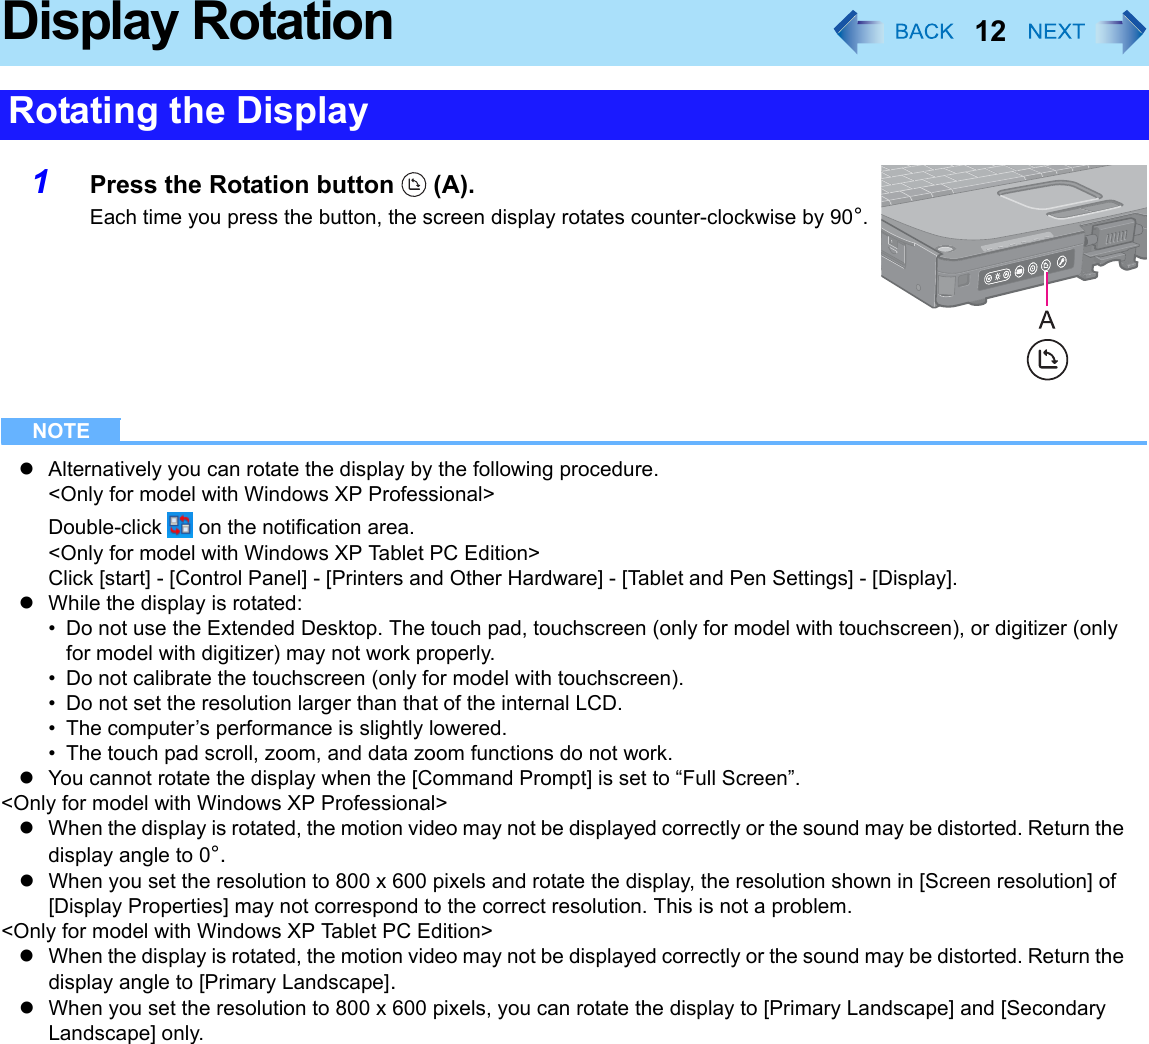 12Display Rotation1Press the Rotation button   (A).Each time you press the button, the screen display rotates counter-clockwise by 90°.NOTEzAlternatively you can rotate the display by the following procedure.&lt;Only for model with Windows XP Professional&gt;Double-click   on the notification area.&lt;Only for model with Windows XP Tablet PC Edition&gt;Click [start] - [Control Panel] - [Printers and Other Hardware] - [Tablet and Pen Settings] - [Display].zWhile the display is rotated:• Do not use the Extended Desktop. The touch pad, touchscreen (only for model with touchscreen), or digitizer (only for model with digitizer) may not work properly.• Do not calibrate the touchscreen (only for model with touchscreen).• Do not set the resolution larger than that of the internal LCD.• The computer’s performance is slightly lowered.• The touch pad scroll, zoom, and data zoom functions do not work.zYou cannot rotate the display when the [Command Prompt] is set to “Full Screen”.&lt;Only for model with Windows XP Professional&gt;zWhen the display is rotated, the motion video may not be displayed correctly or the sound may be distorted. Return the display angle to 0°.zWhen you set the resolution to 800 x 600 pixels and rotate the display, the resolution shown in [Screen resolution] of [Display Properties] may not correspond to the correct resolution. This is not a problem.&lt;Only for model with Windows XP Tablet PC Edition&gt;zWhen the display is rotated, the motion video may not be displayed correctly or the sound may be distorted. Return the display angle to [Primary Landscape].zWhen you set the resolution to 800 x 600 pixels, you can rotate the display to [Primary Landscape] and [Secondary Landscape] only.Rotating the Display